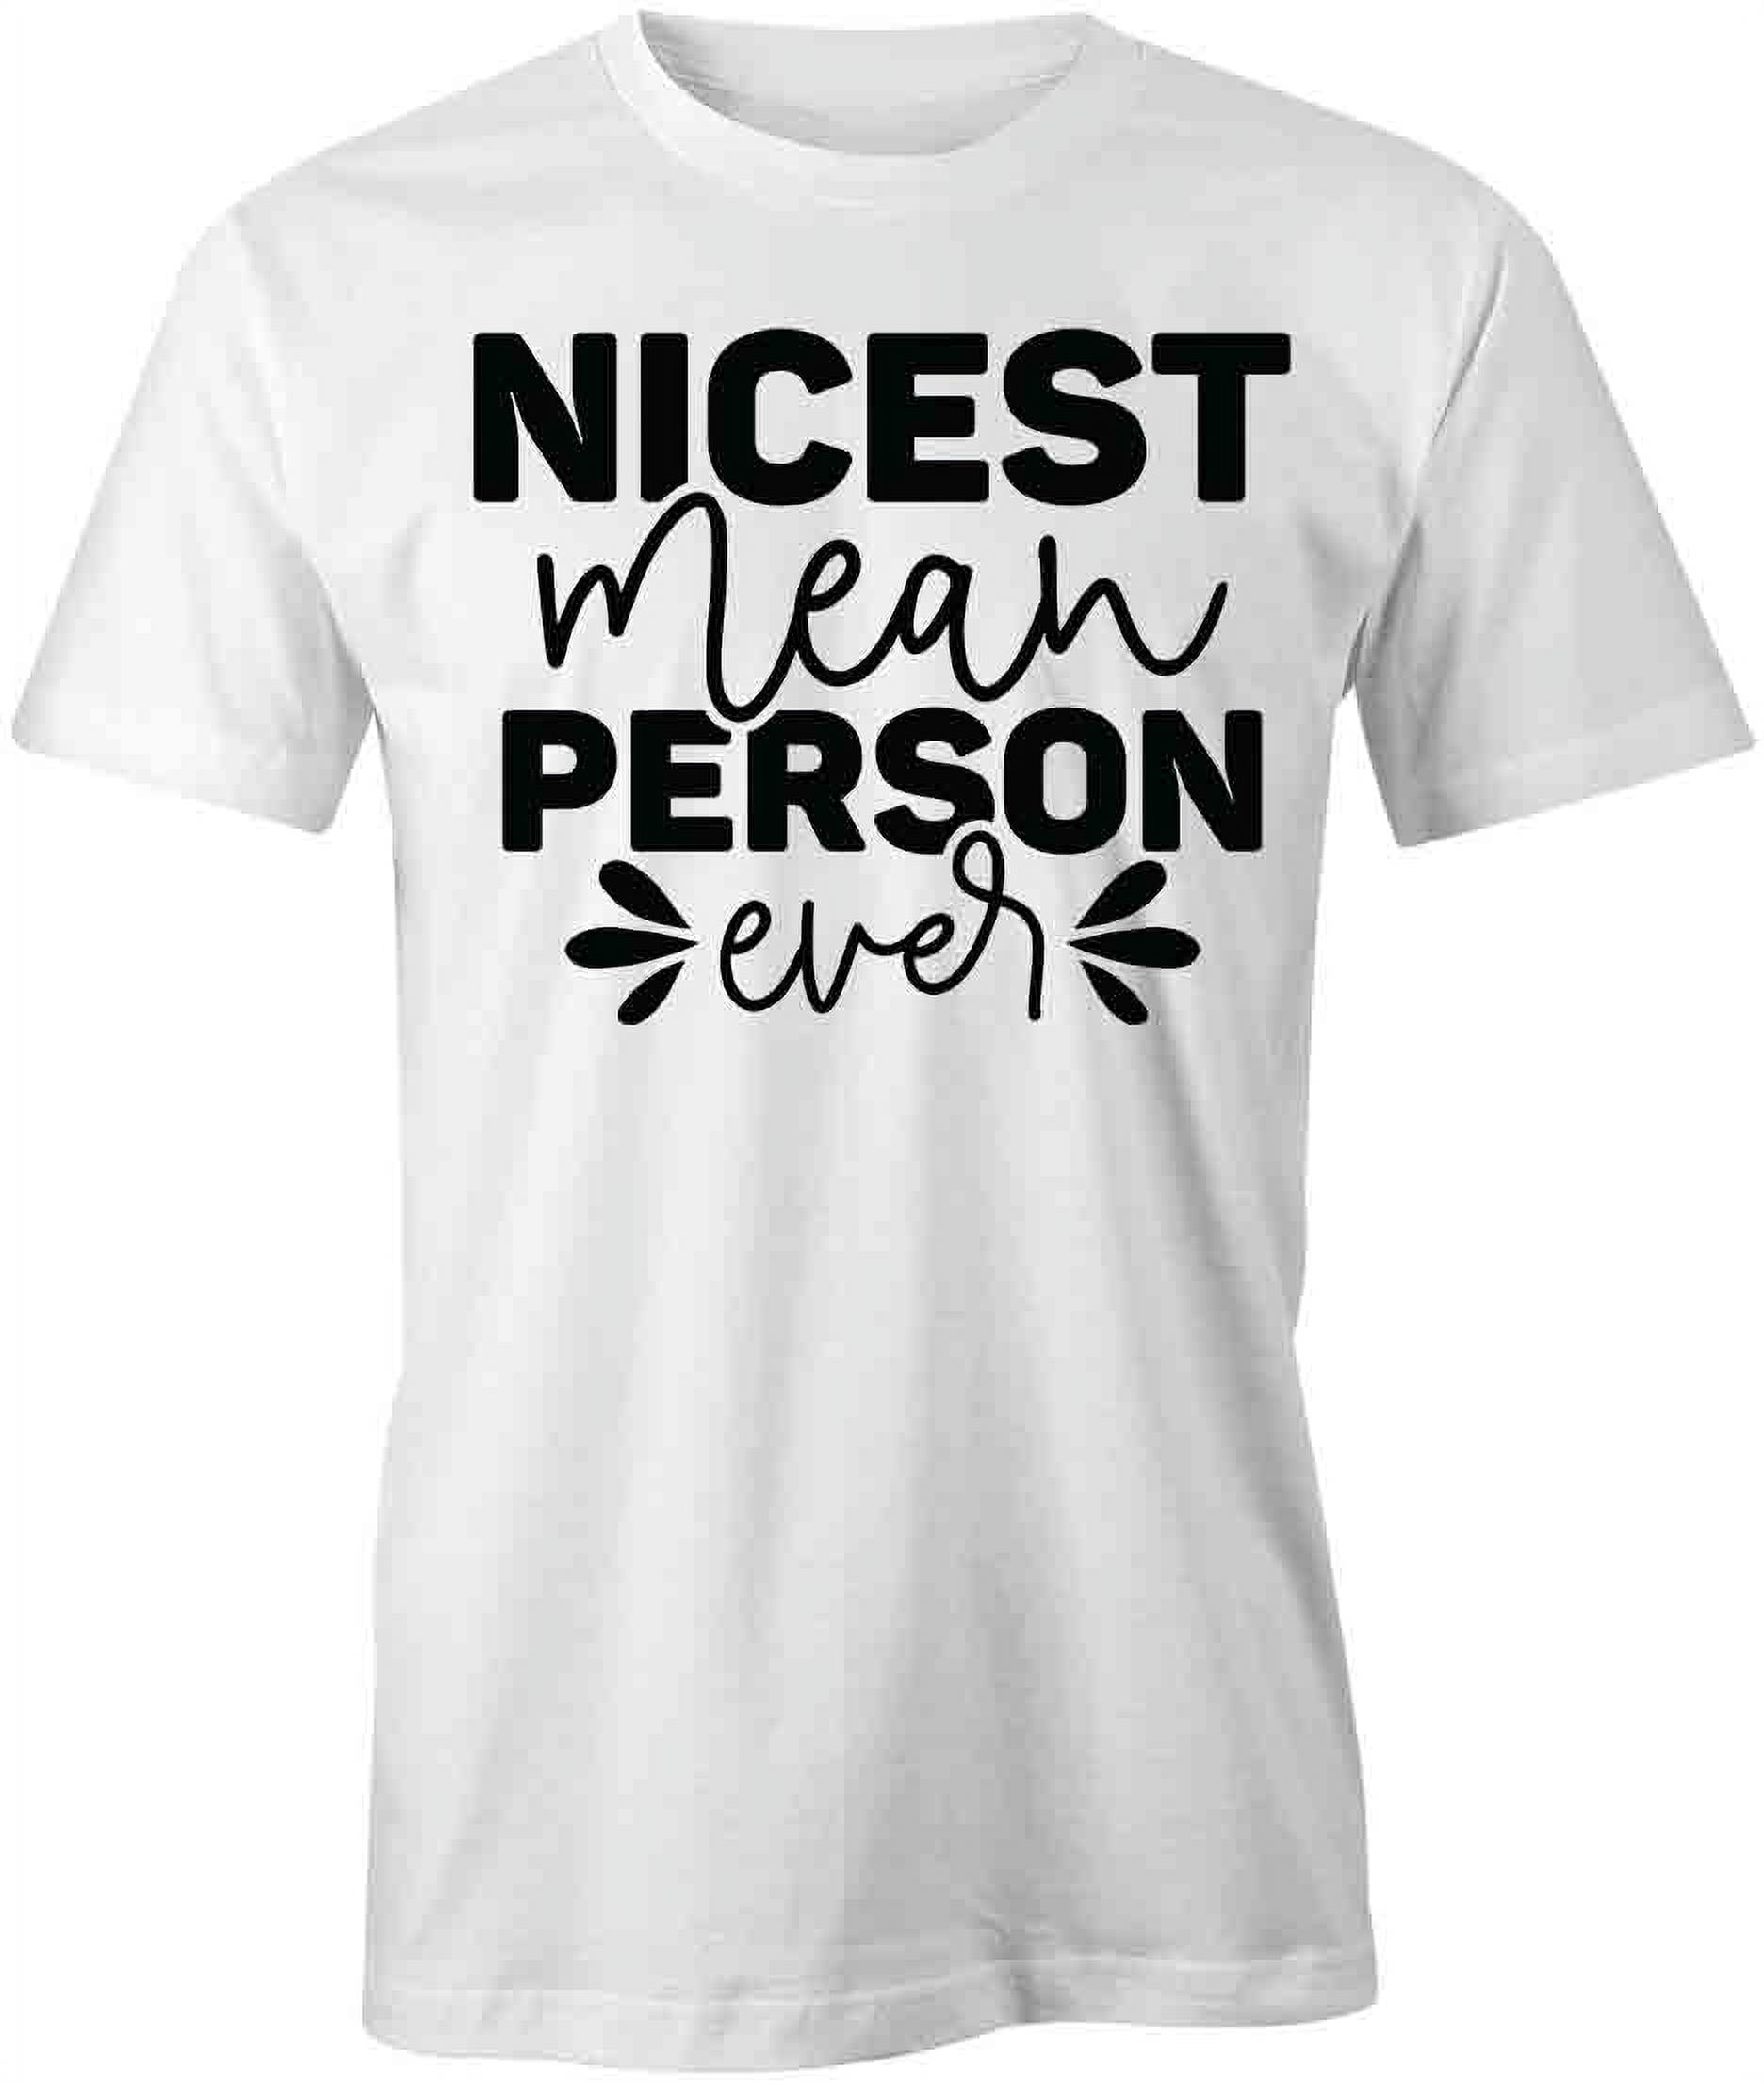 Nicest Mean Person Ever T-Shirt | Funny Quote Saying White Tee Gift -  